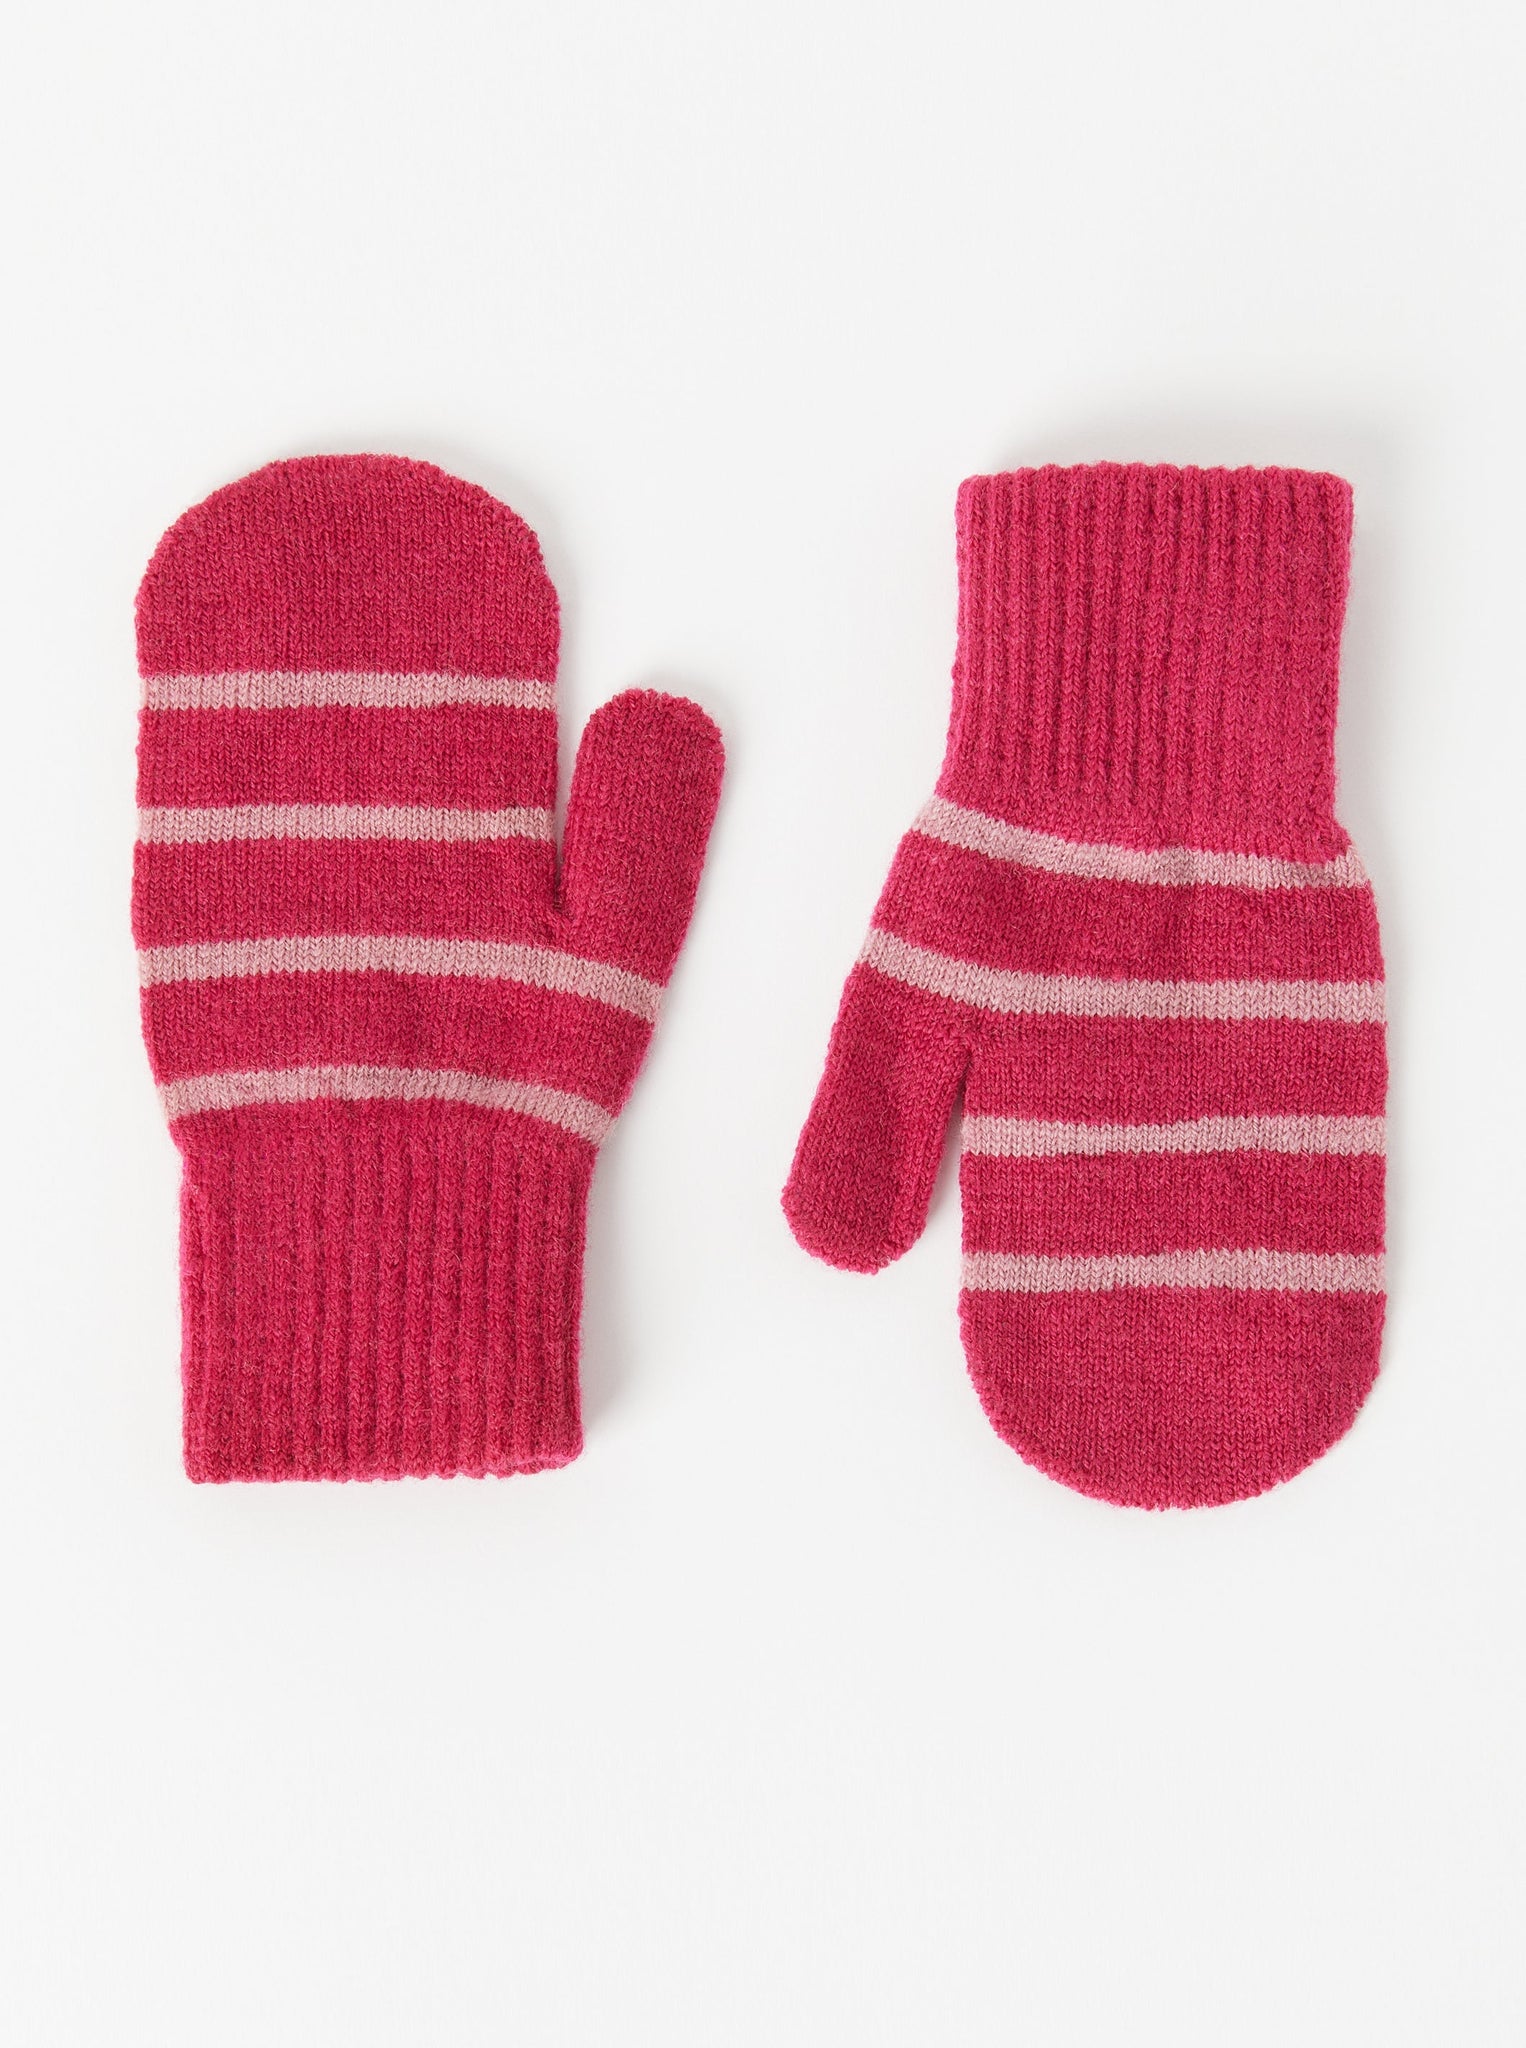 Red Magic Kids Mittens Multipack from the Polarn O. Pyret kidswear collection. Made using ethically sourced materials.